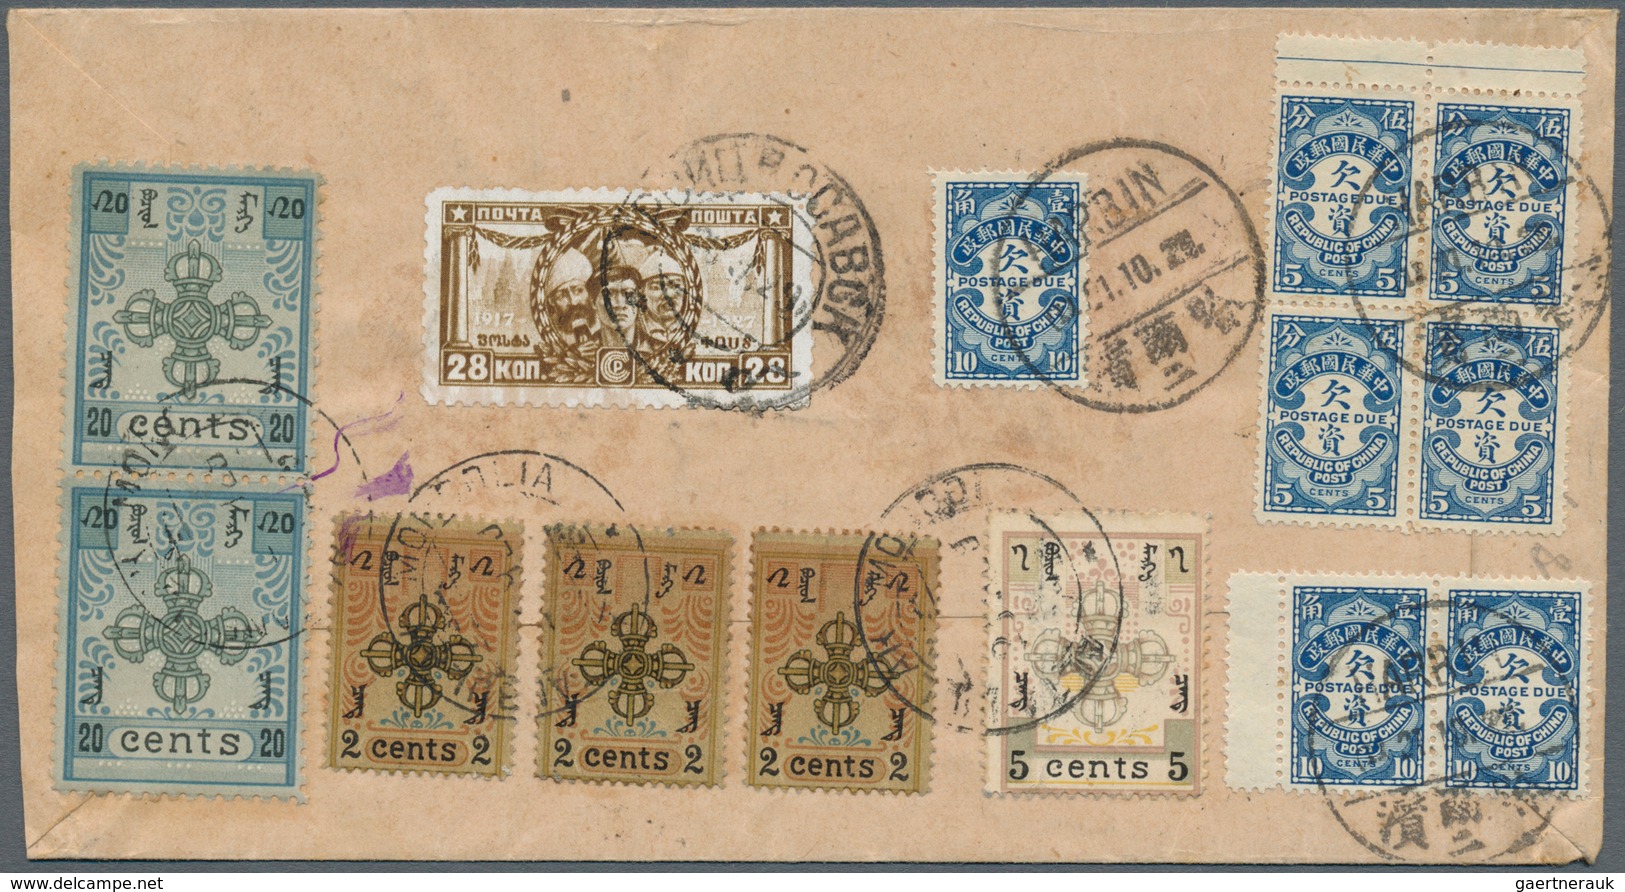 00386 Mongolei: 1929 Registered Cover With Russian/Mongolian/Chinese Mixed Franking From A Russian P.O. To - Mongolei